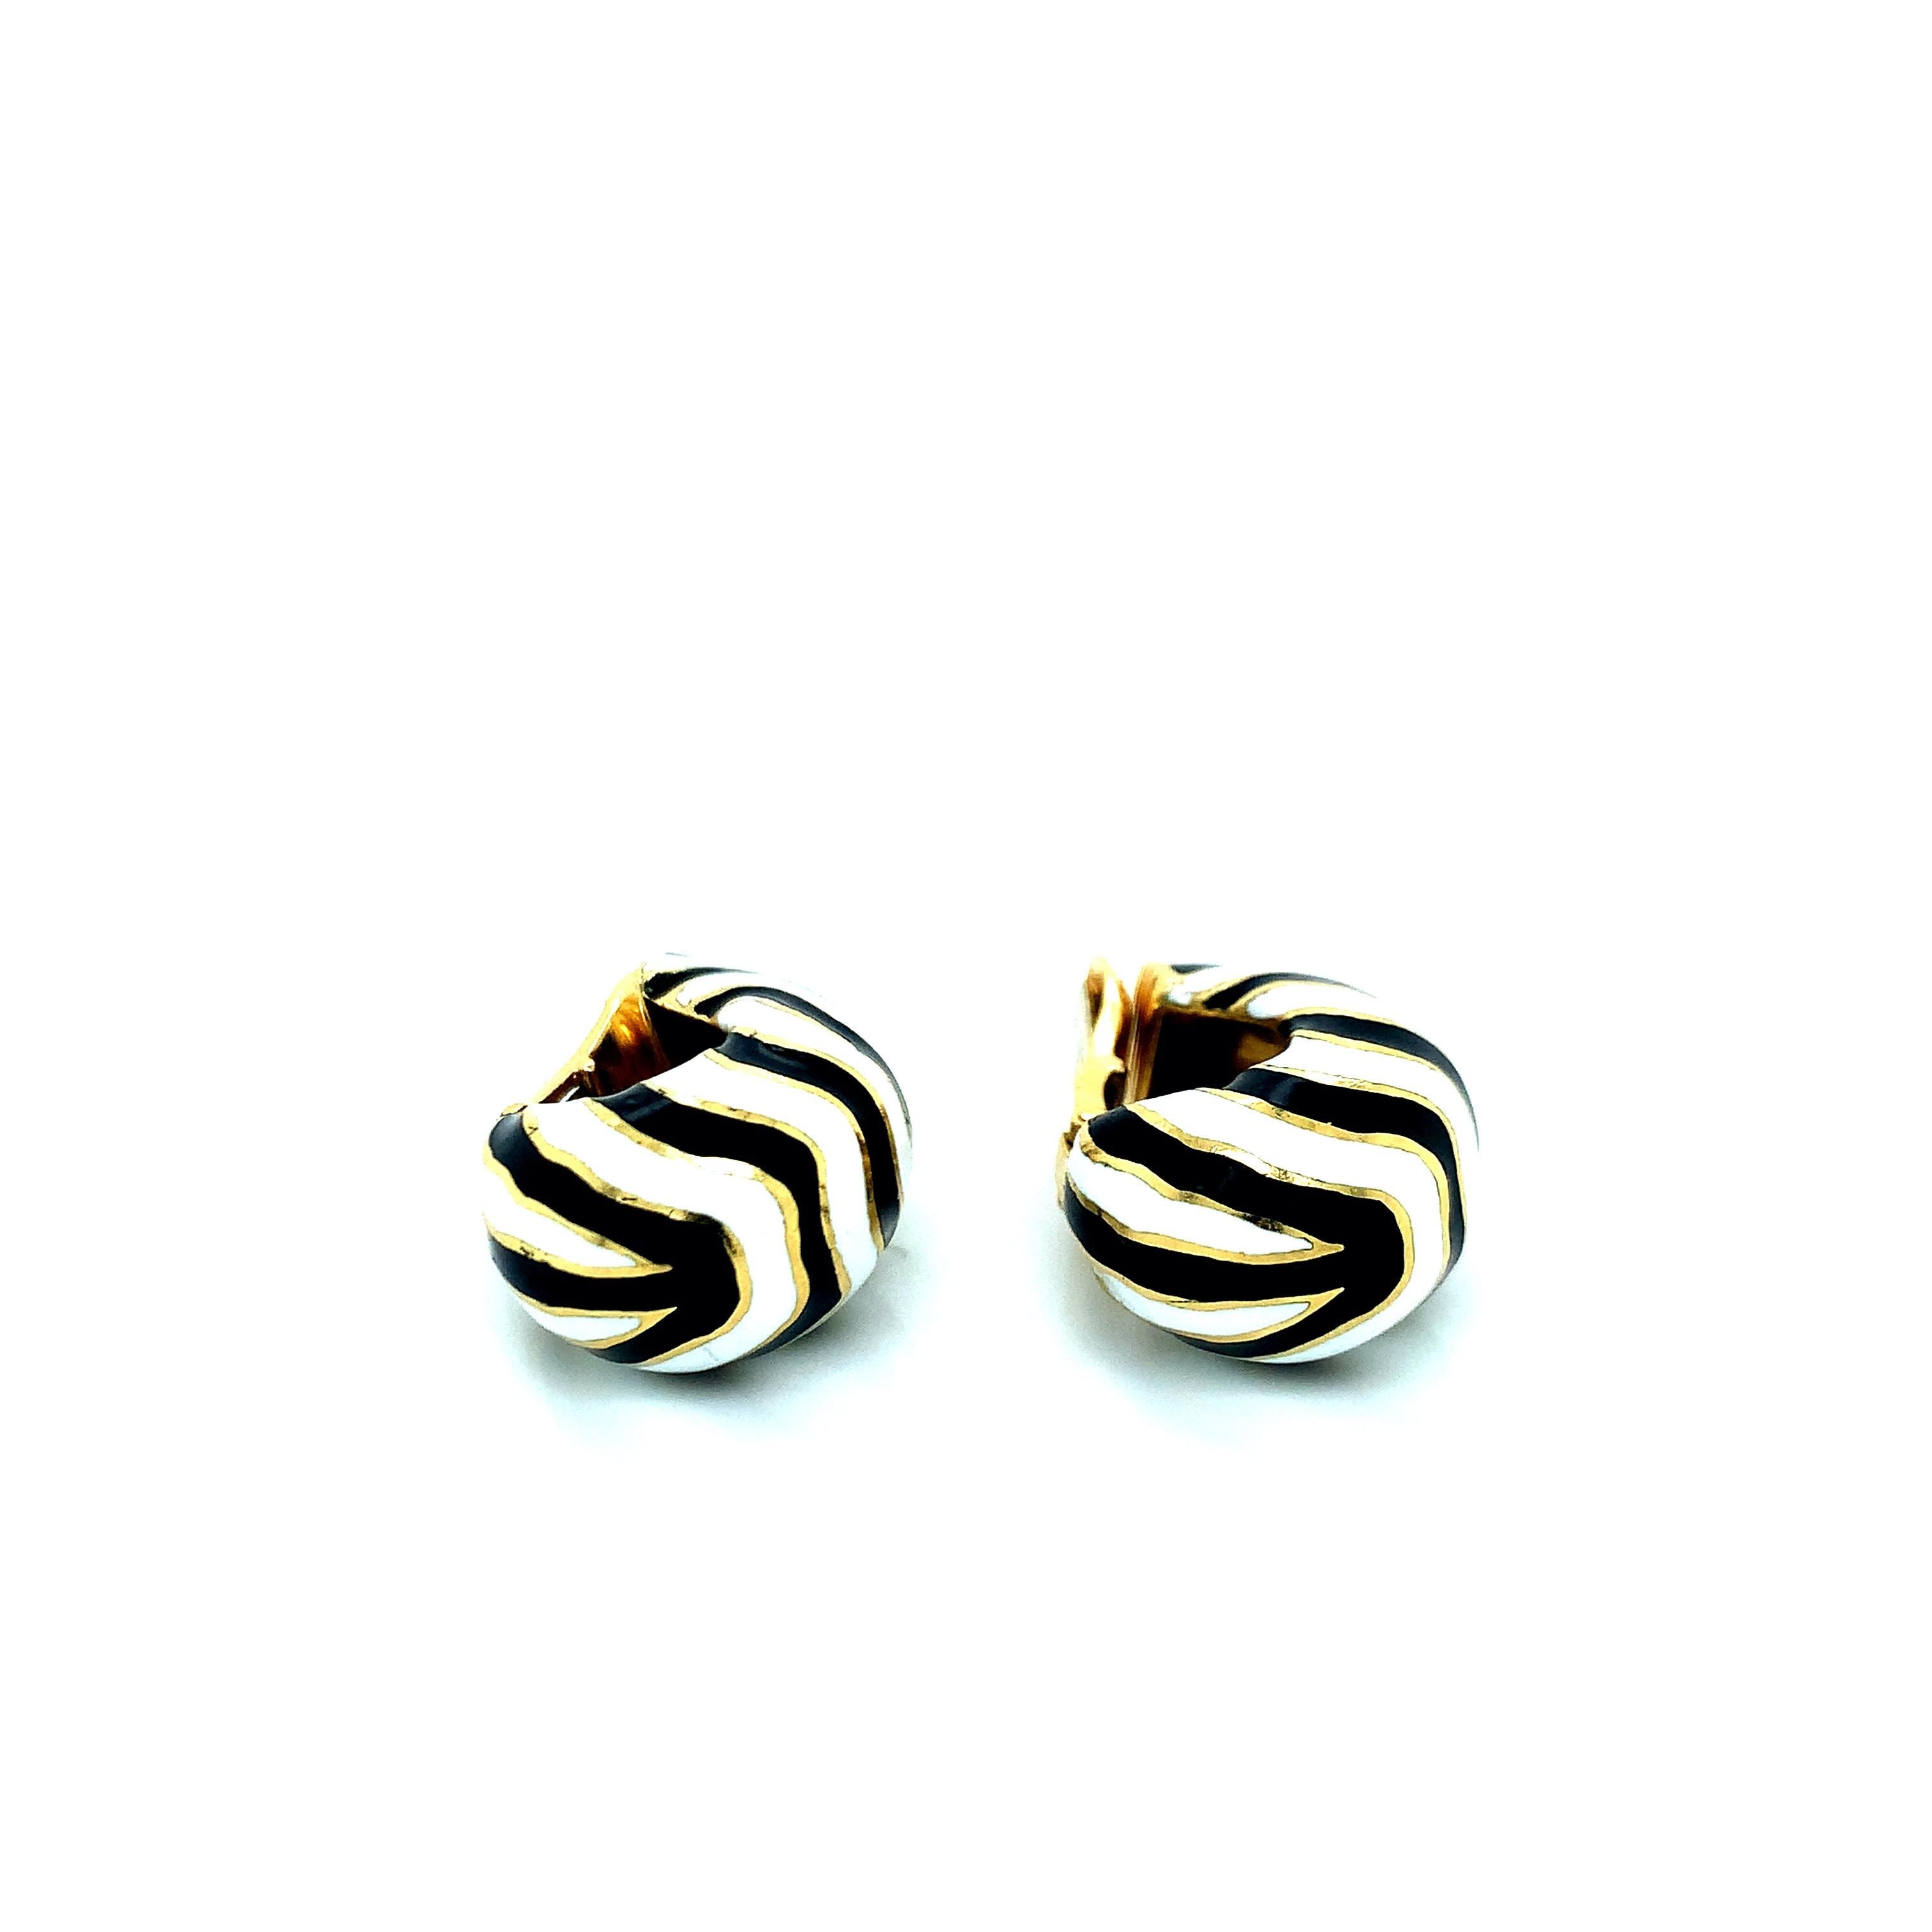 David Webb Zebra Ear Clips In Excellent Condition For Sale In New York, NY